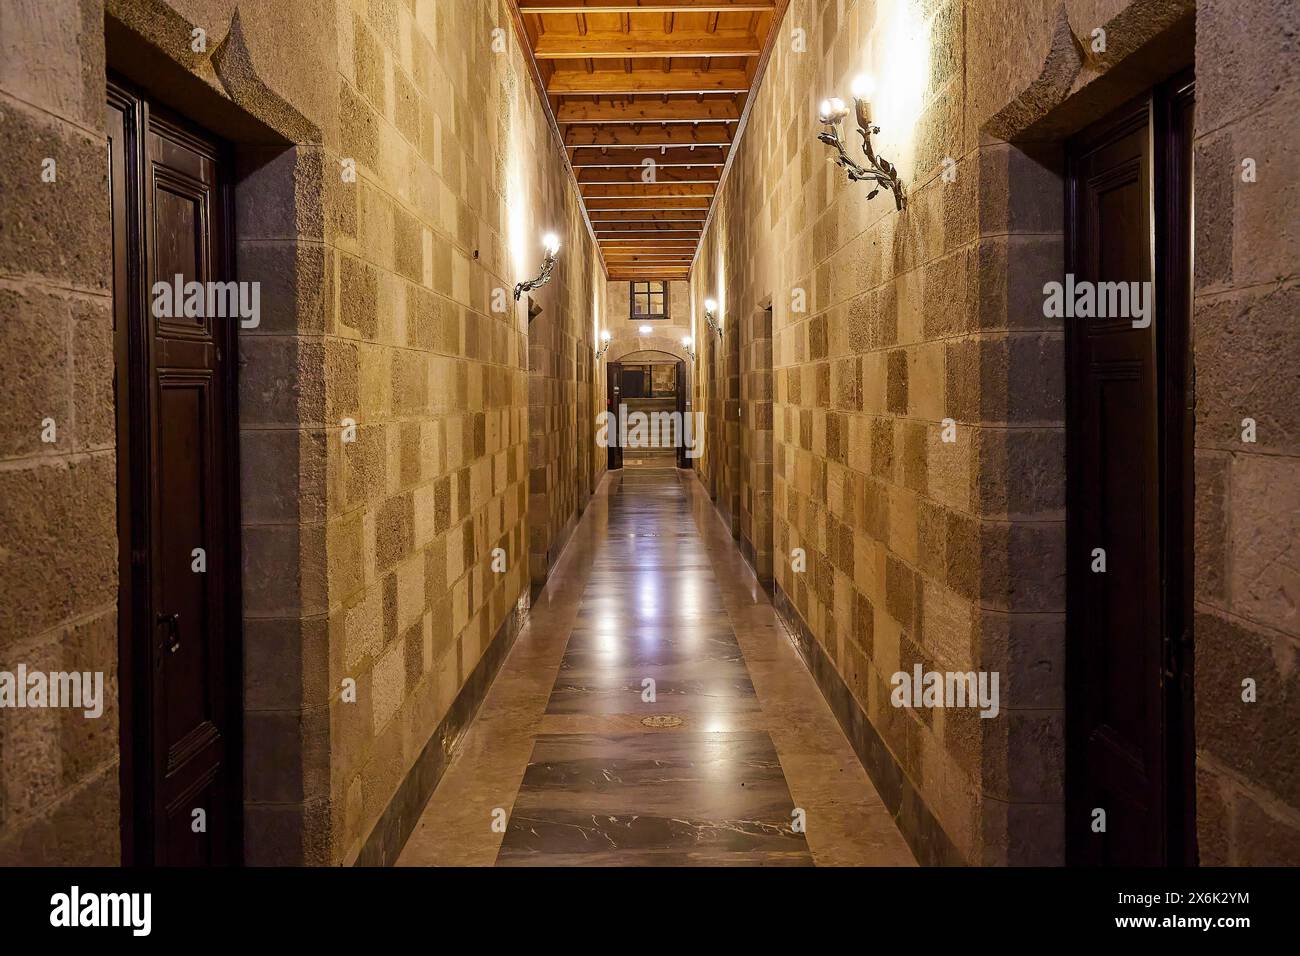 Long corridor with symmetrical stone walls and lighting, interior view, Grand Master's Palace, Knights' Town, Rhodes Town, Rhodes, Dodecanese, Greek Stock Photo